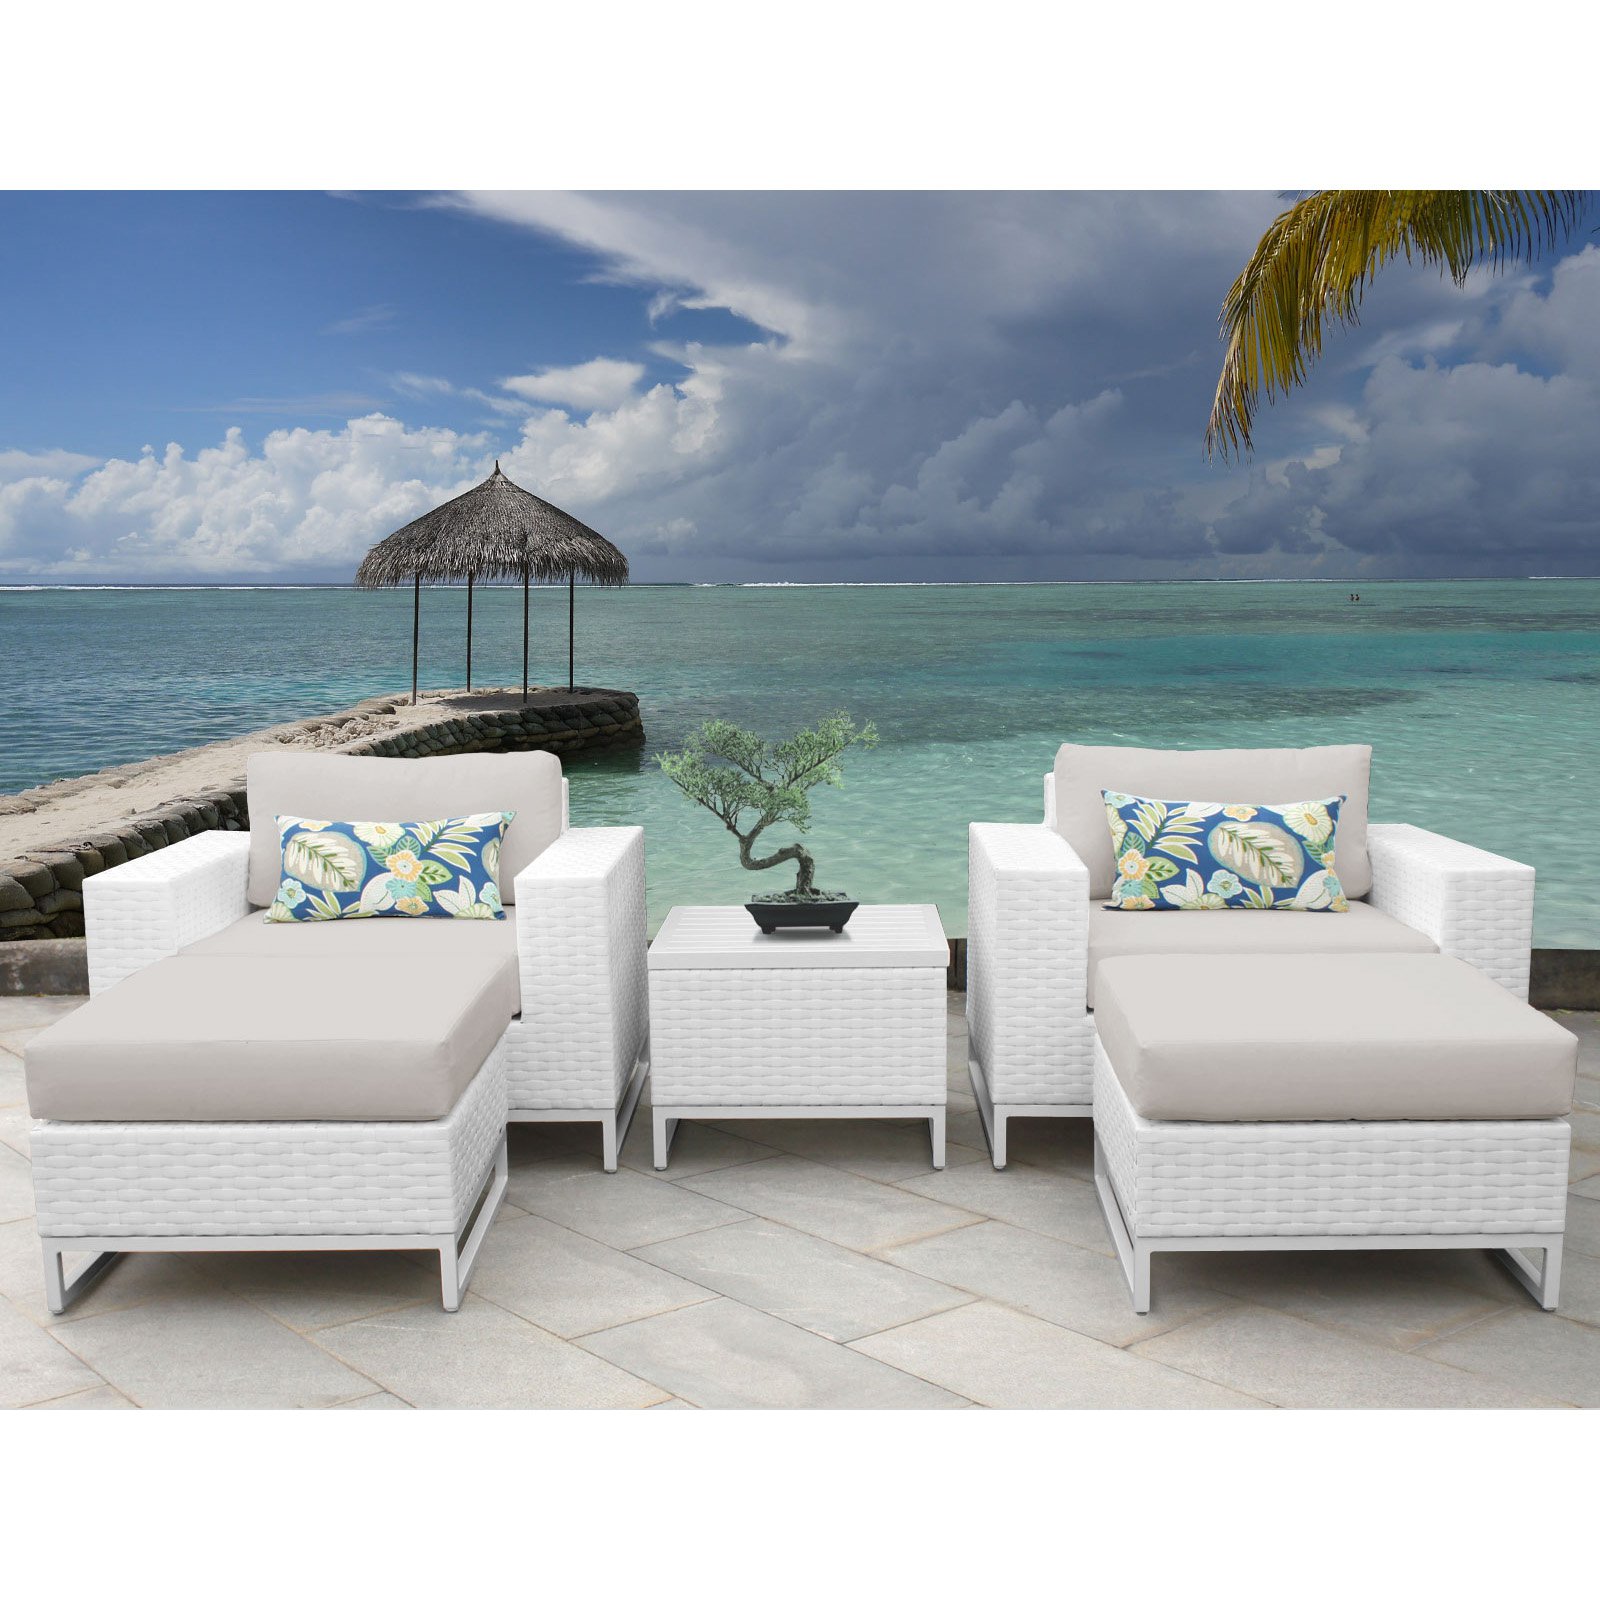 Florida 5-Piece Aluminum Framed Outdoor Conversation Set with Ottomans - image 1 of 3